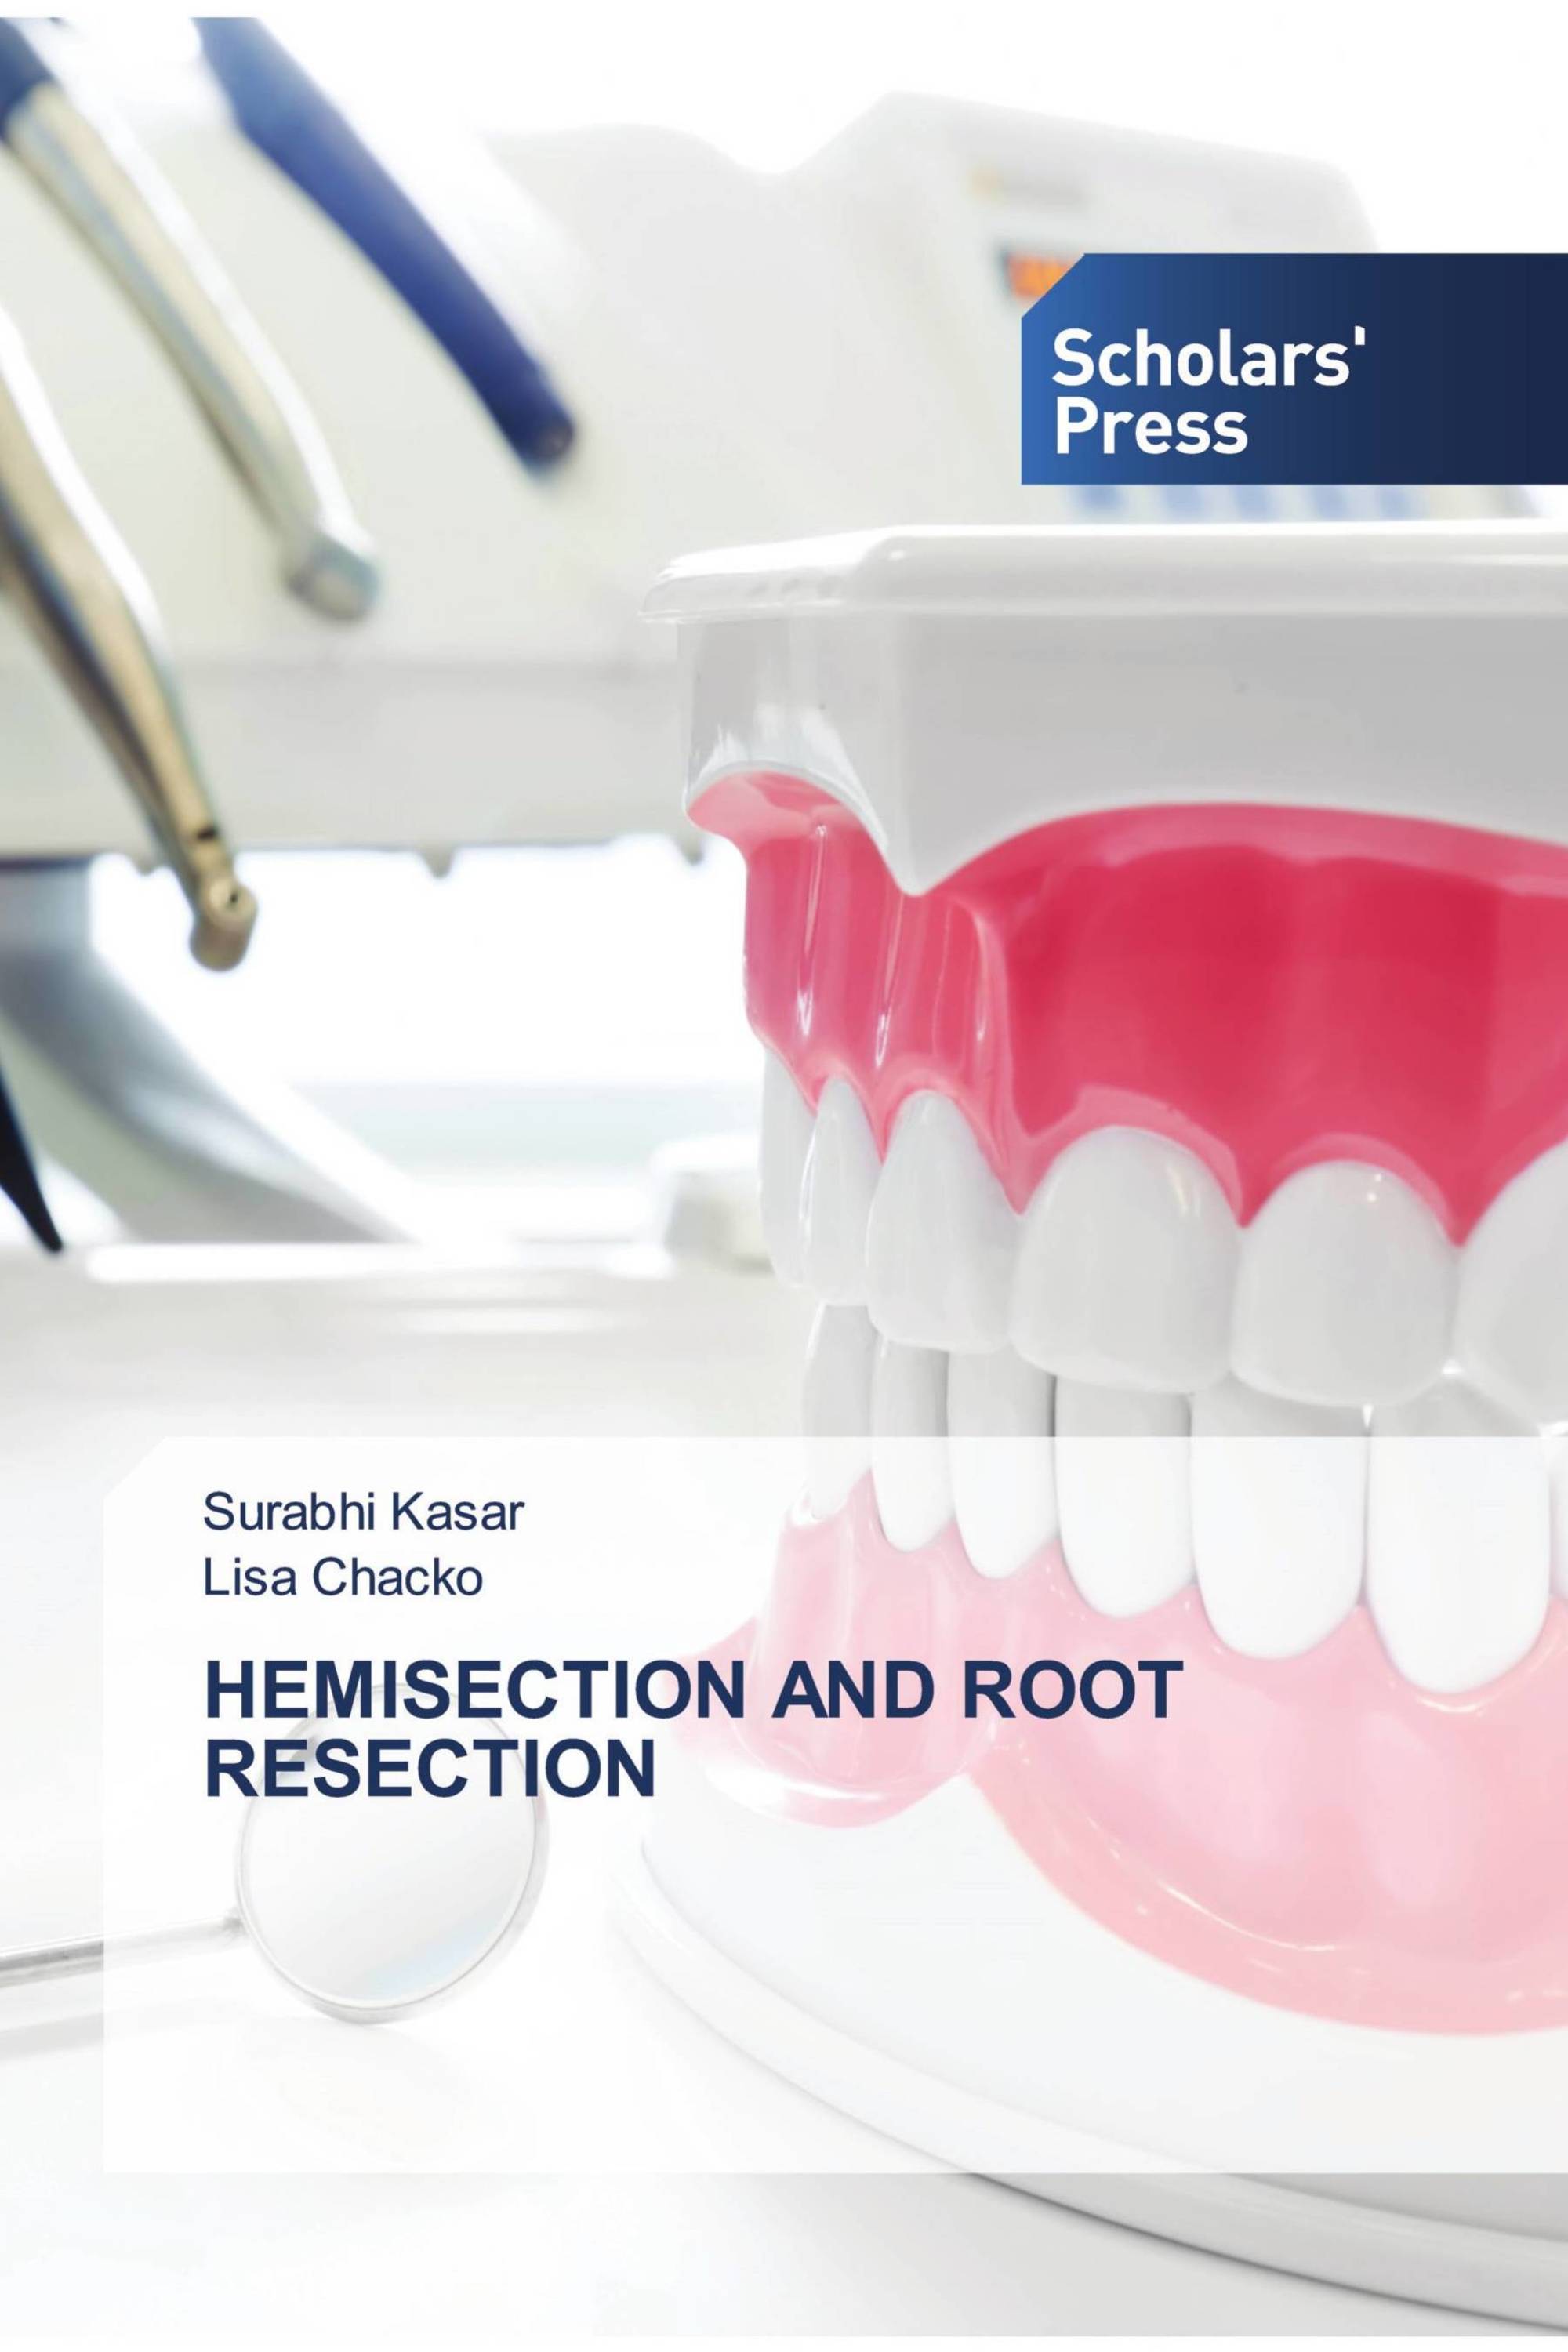 HEMISECTION AND ROOT RESECTION